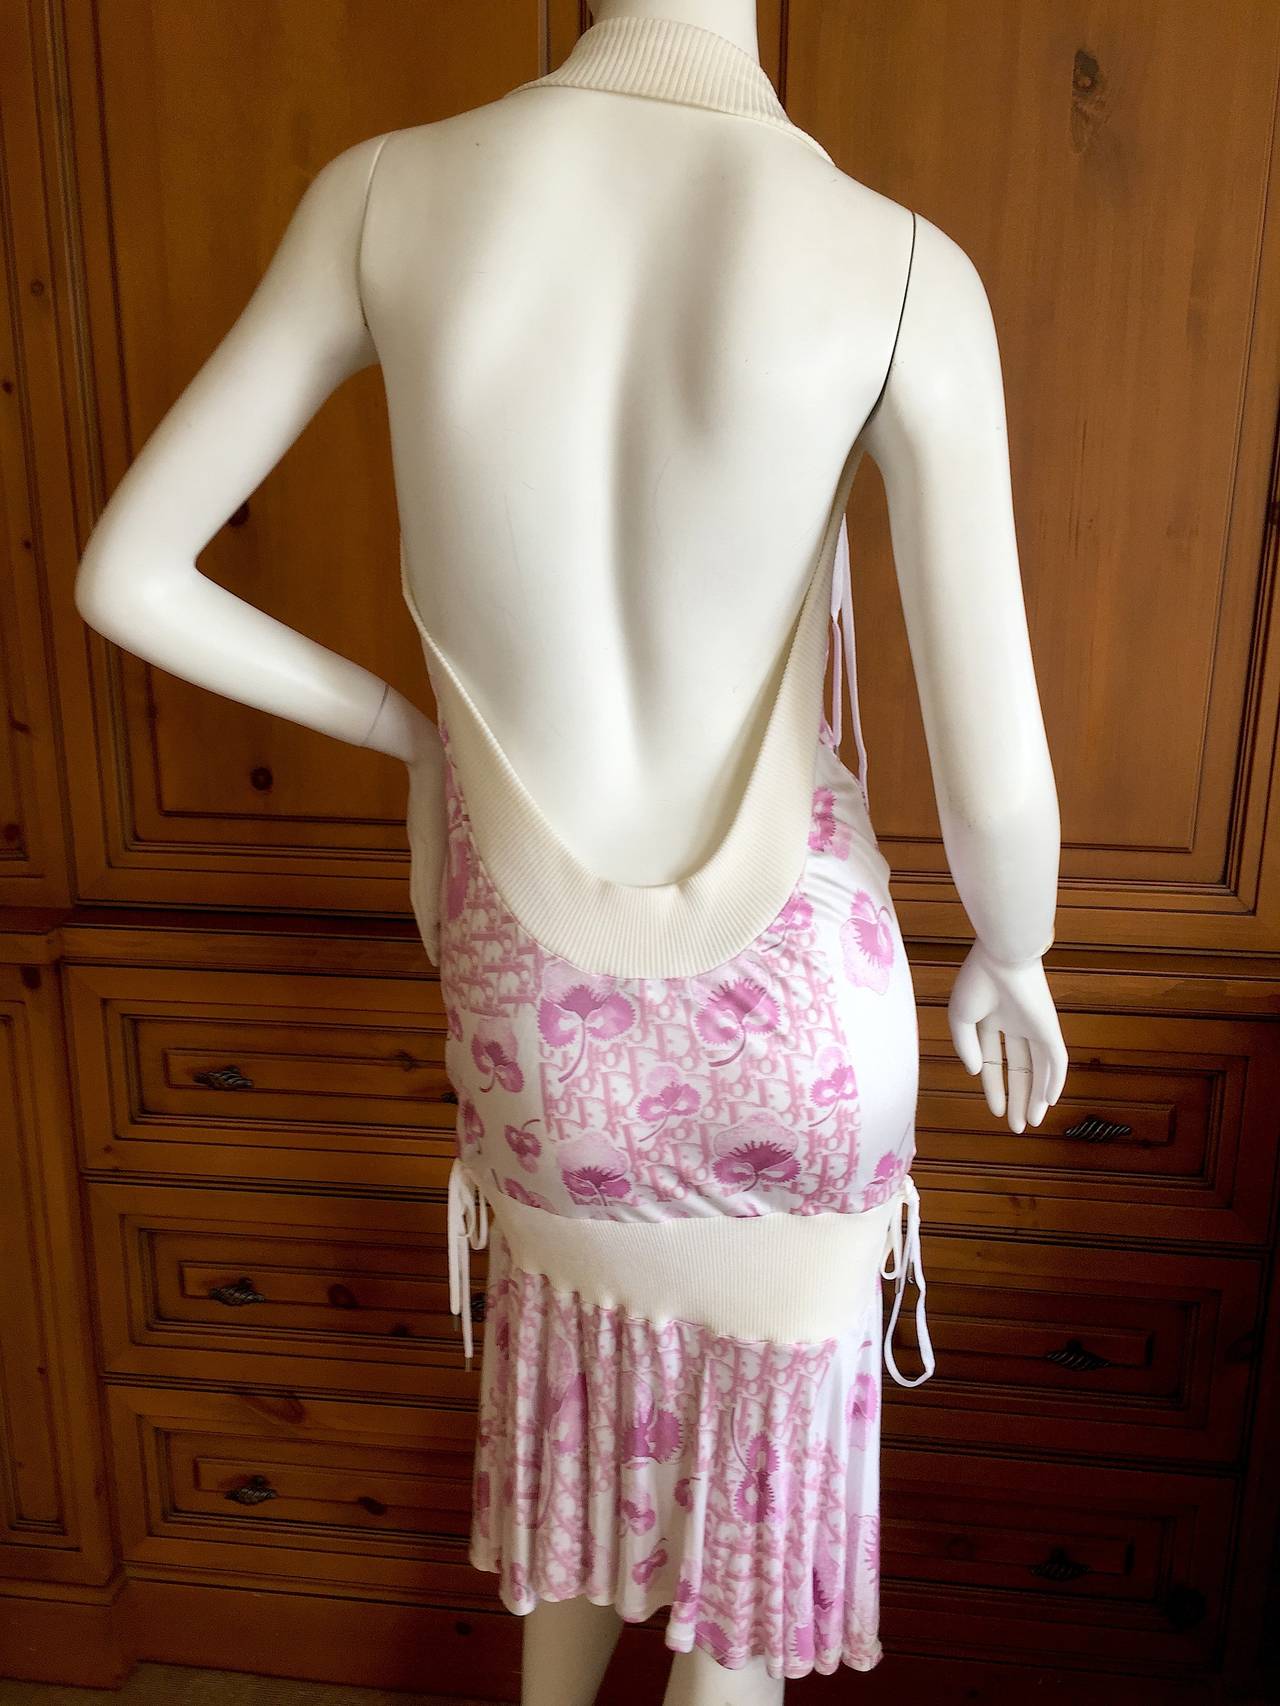 Christian Dior by John Galliano Backless Diorissimo Logo Dress
This is so adorable with white ribbing and pink Diorissimo logo pattern.

 NWT
Sz 40 (US 8)
Measurements: Bust 40